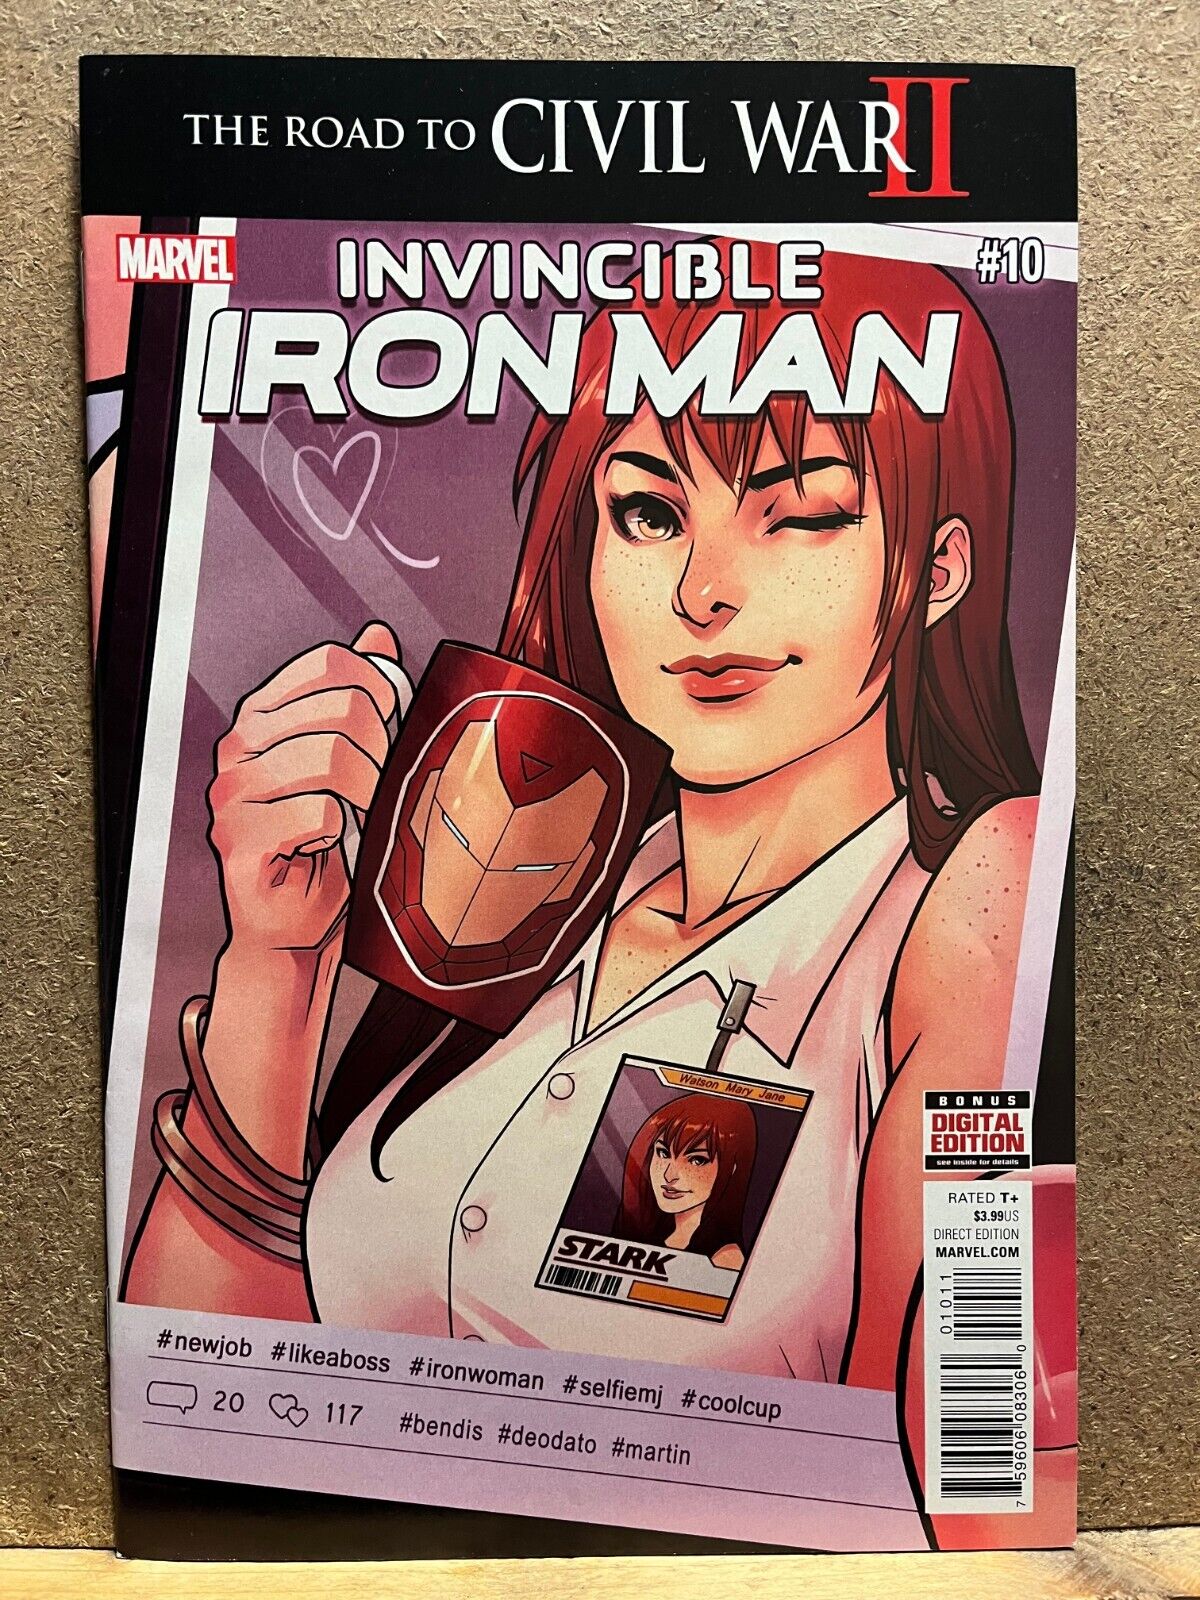 INVINCIBLE IRON MAN - # 10 - AUGUST2016 - VF+/NM